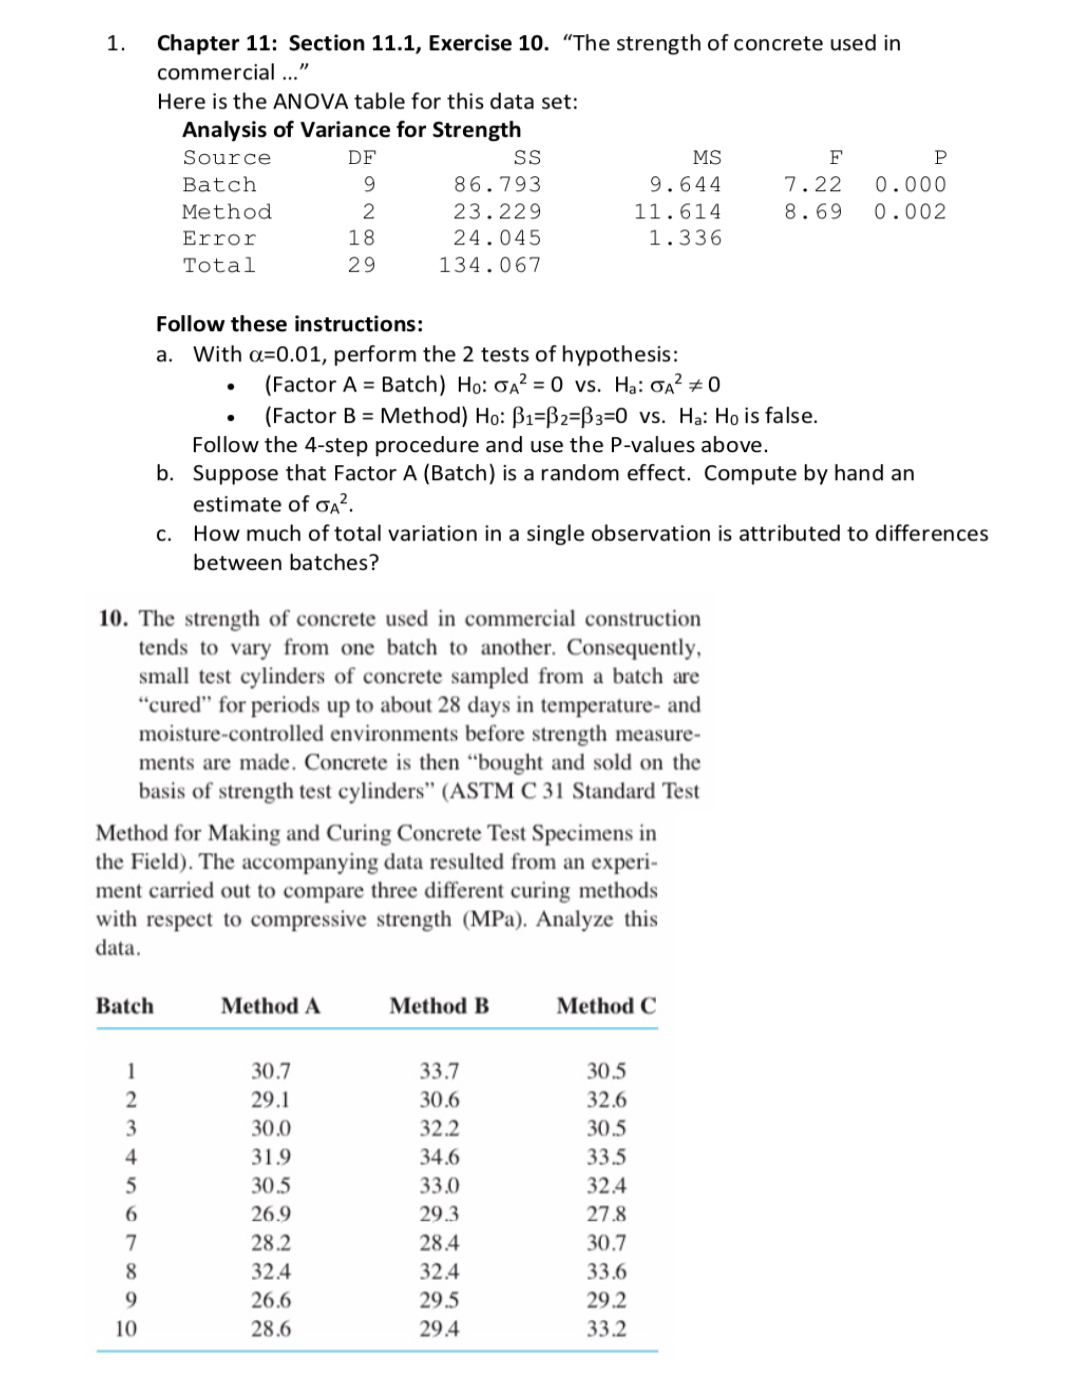 1. Chapter 11: Section 11.1, Exercise 10. "The strength of concrete used in
commercial..."
Here is the ANOVA table for this data set:
Analysis of Variance for Strength
Source
Batch
Method
Error
Total
DF
86.7913
23.229
24.045
134.067
MS
9.644
11.614
1.336
7.22 0.000
8.69 0.002
2
18
29
Follow these instructions:
a,
with α-0.01, perform the 2 tests of hypothesis:
(Factor A-Batch) Ho:CA2-0 vs. Ha : ƠA2
(Factor B-Method) Ho: β1-62-63-o vs. Ha. Ho is false.
0
.
.
Follow the 4-step procedure and use the P-values above.
b. Suppose that Factor A (Batch) is a random effect. Compute by hand arn
estimate of ơA2
How much of total variation in a single observation is attributed to differences
between batches?
c.
10. The strength of concrete used in commercial construction
tends to vary from one batch to another. Consequently
small test cylinders of concrete sampled from a batch are
"cured" for periods up to about 28 days in temperature- and
moisture-controlled environments before strength measure-
ments are made. Concrete is then "bought and sold on the
basis of strength test cylinders" (ASTM C 31 Standard Test
Method for Making and Curing Concrete Test Specimens in
the Field). The accompanying data resulted from an experi-
ment carried out to compare three different curing methods
with respect to compressive strength (MPa). Analyze this
data
Batch
Method A
Method B
Method C
30.7
29.1
30.0
31.9
30.5
26.9
28.2
32.4
26.6
28.6
33.7
30.6
32.2
34.6
33.0
29.3
28.4
32.4
29.5
29.4
30.5
30.5
33.5
32.4
27.8
30.7
33.6
29.2
33.2
4
10
